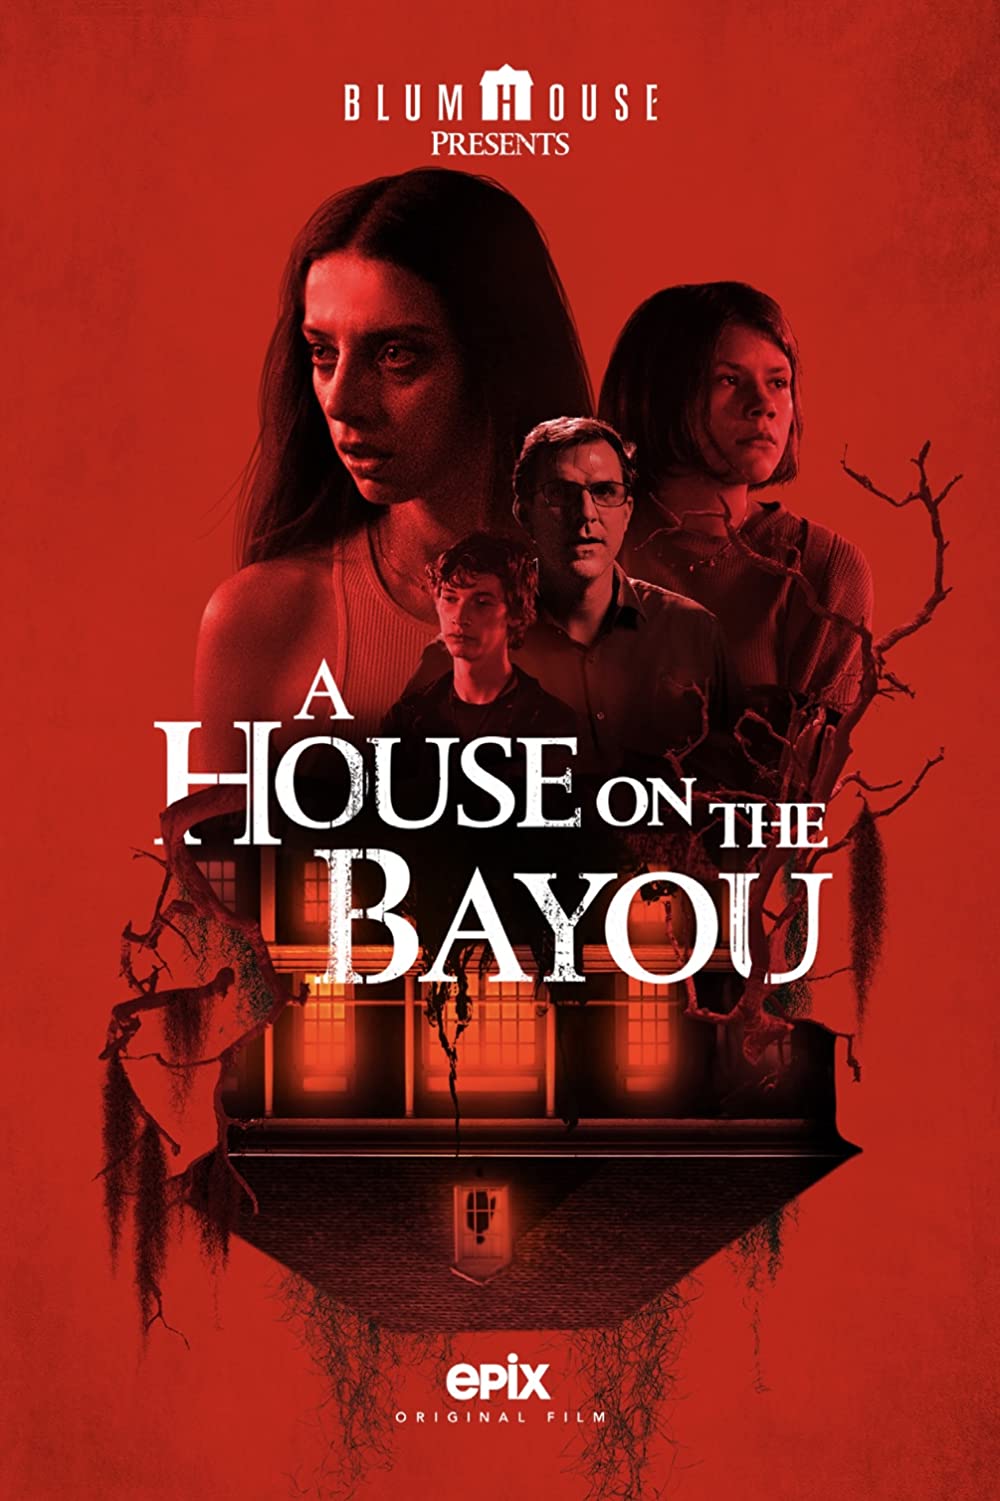 Watch Haunted Trail (2021) Free On 1Movies - Where Can I Watch A House On The Bayou